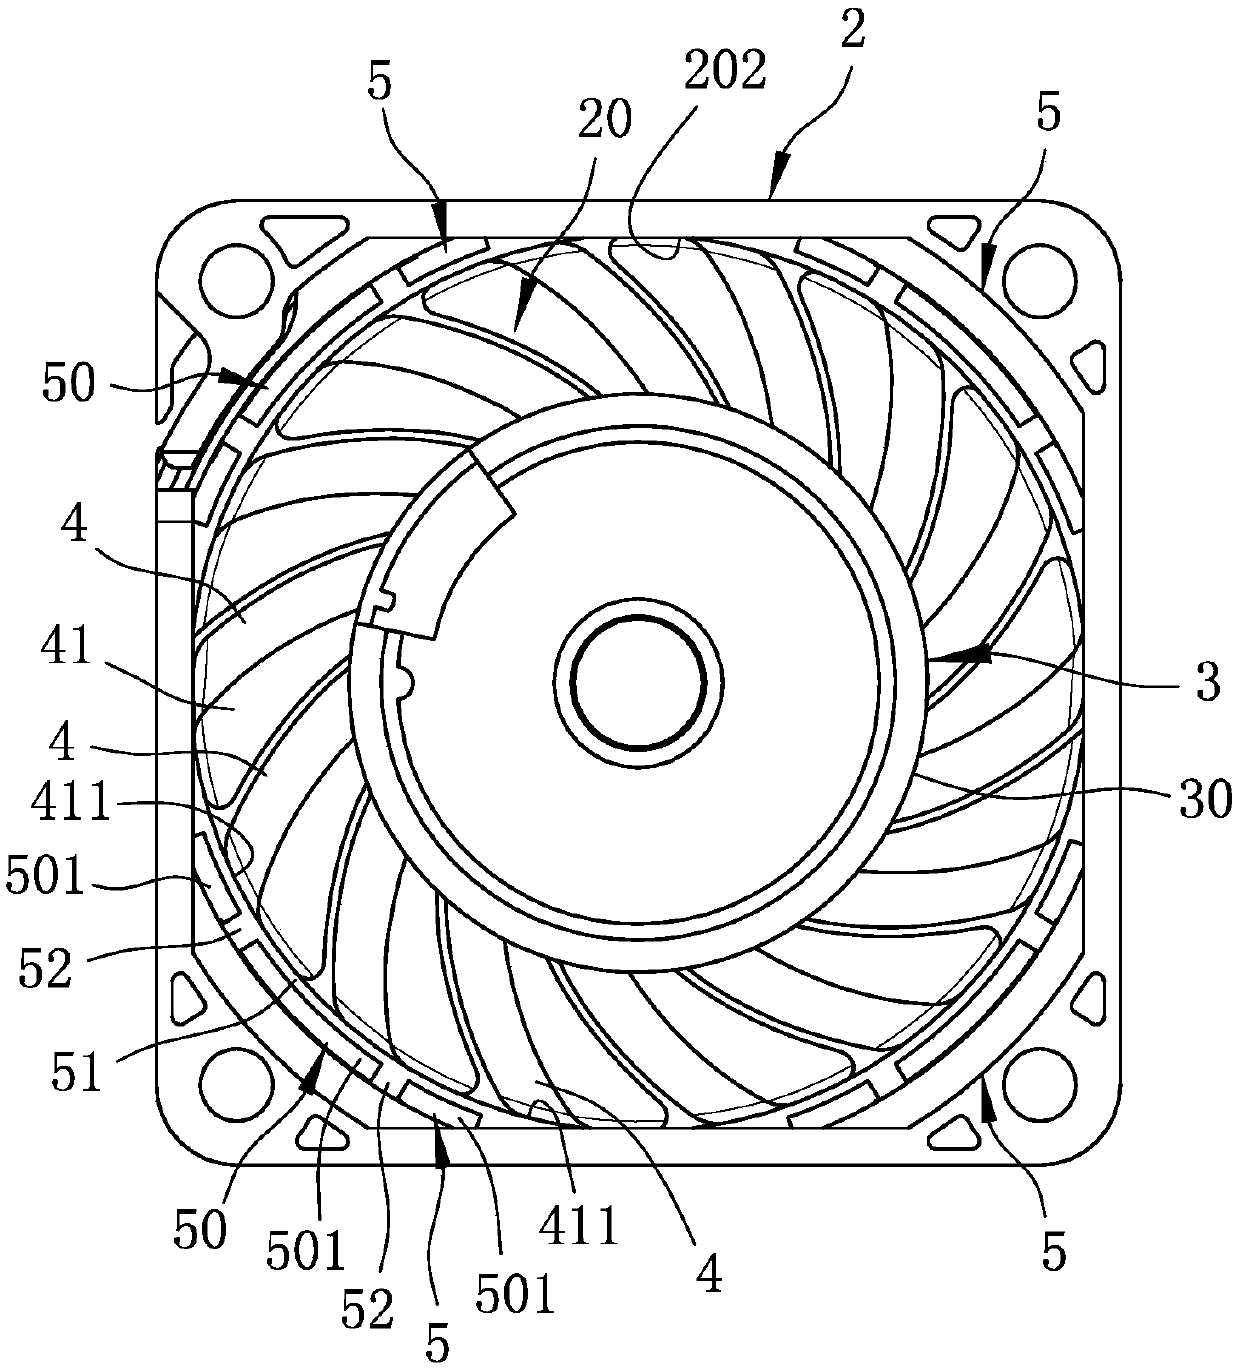 Fan frame capable of reducing noise